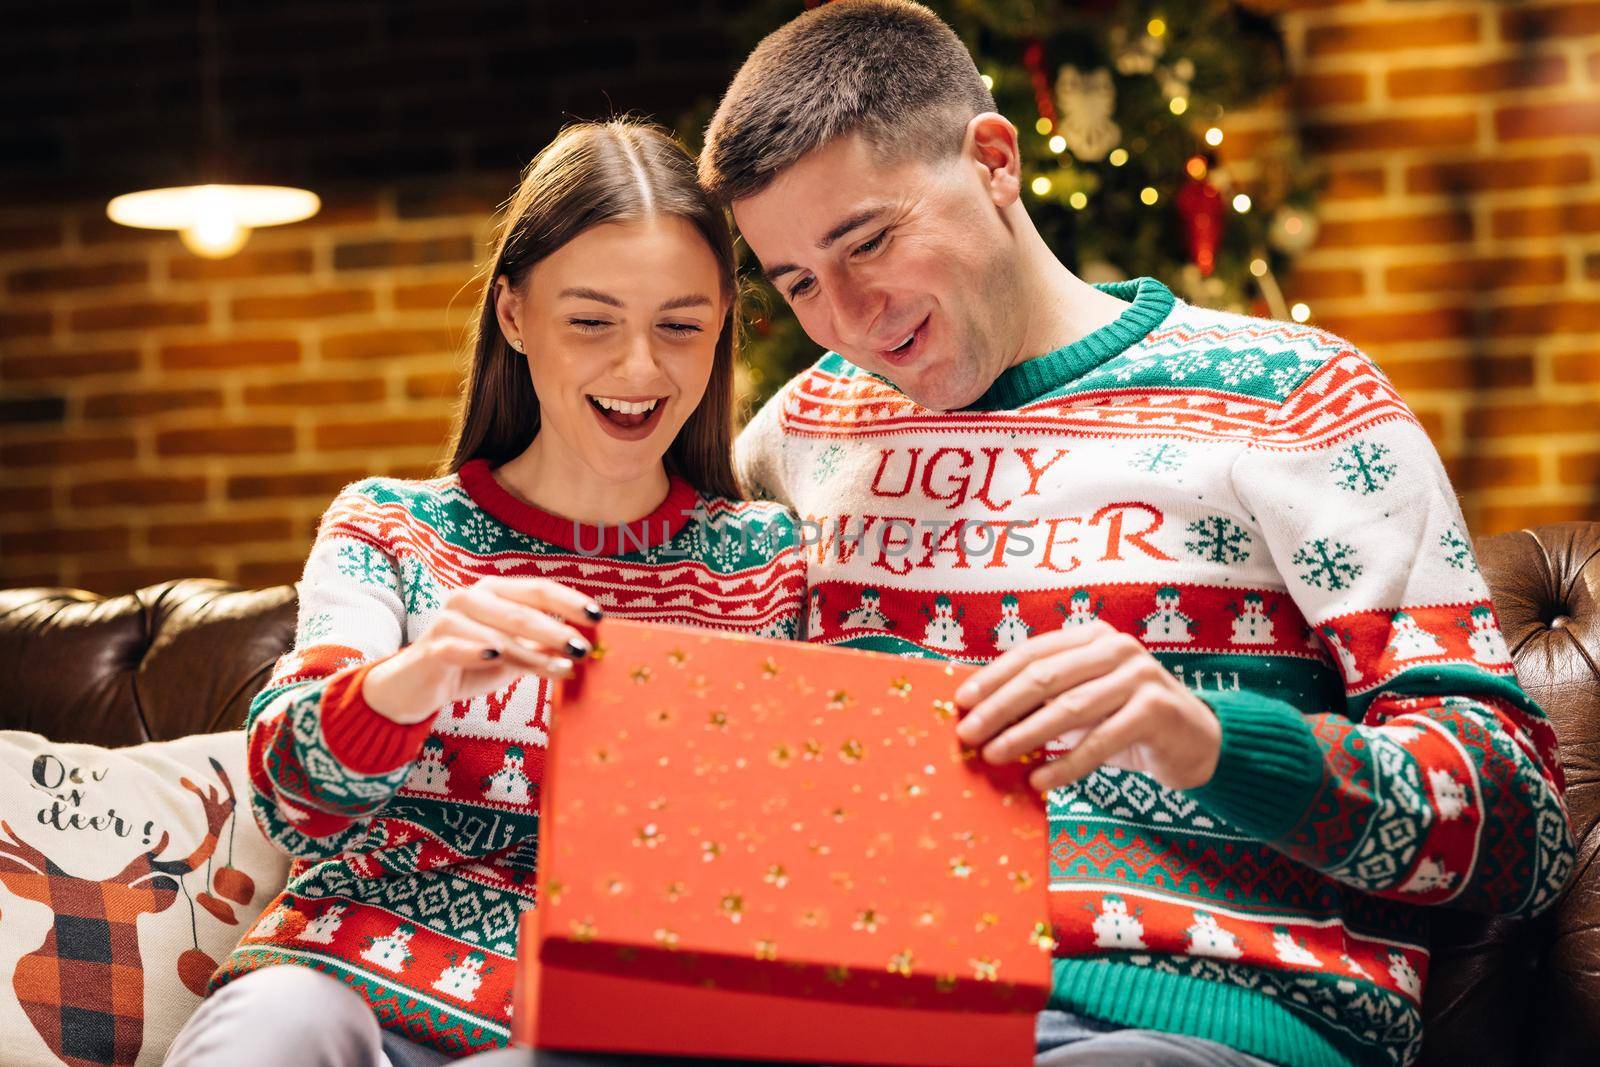 Concept of holidays, romance, surprise, e-commerce, Xmas, Holiday miracle. Happy man is making christmas gift to his beloved woman. The woman is surprised and excited after opening received gift box by uflypro